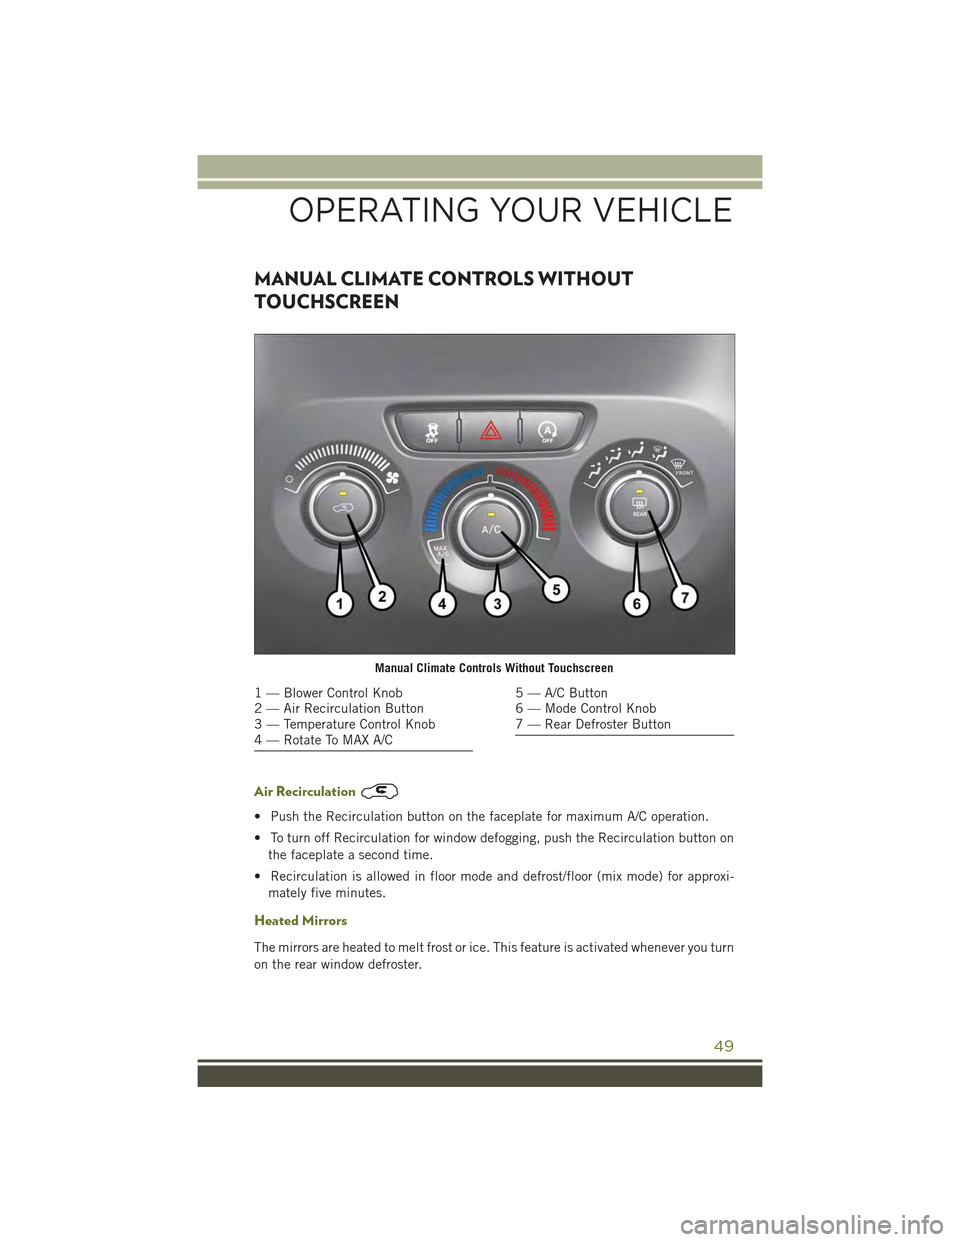 JEEP CHEROKEE 2015 KL / 5.G User Guide MANUAL CLIMATE CONTROLS WITHOUT
TOUCHSCREEN
Air Recirculation
• Push the Recirculation button on the faceplate for maximum A/C operation.
• To turn off Recirculation for window defogging, push the